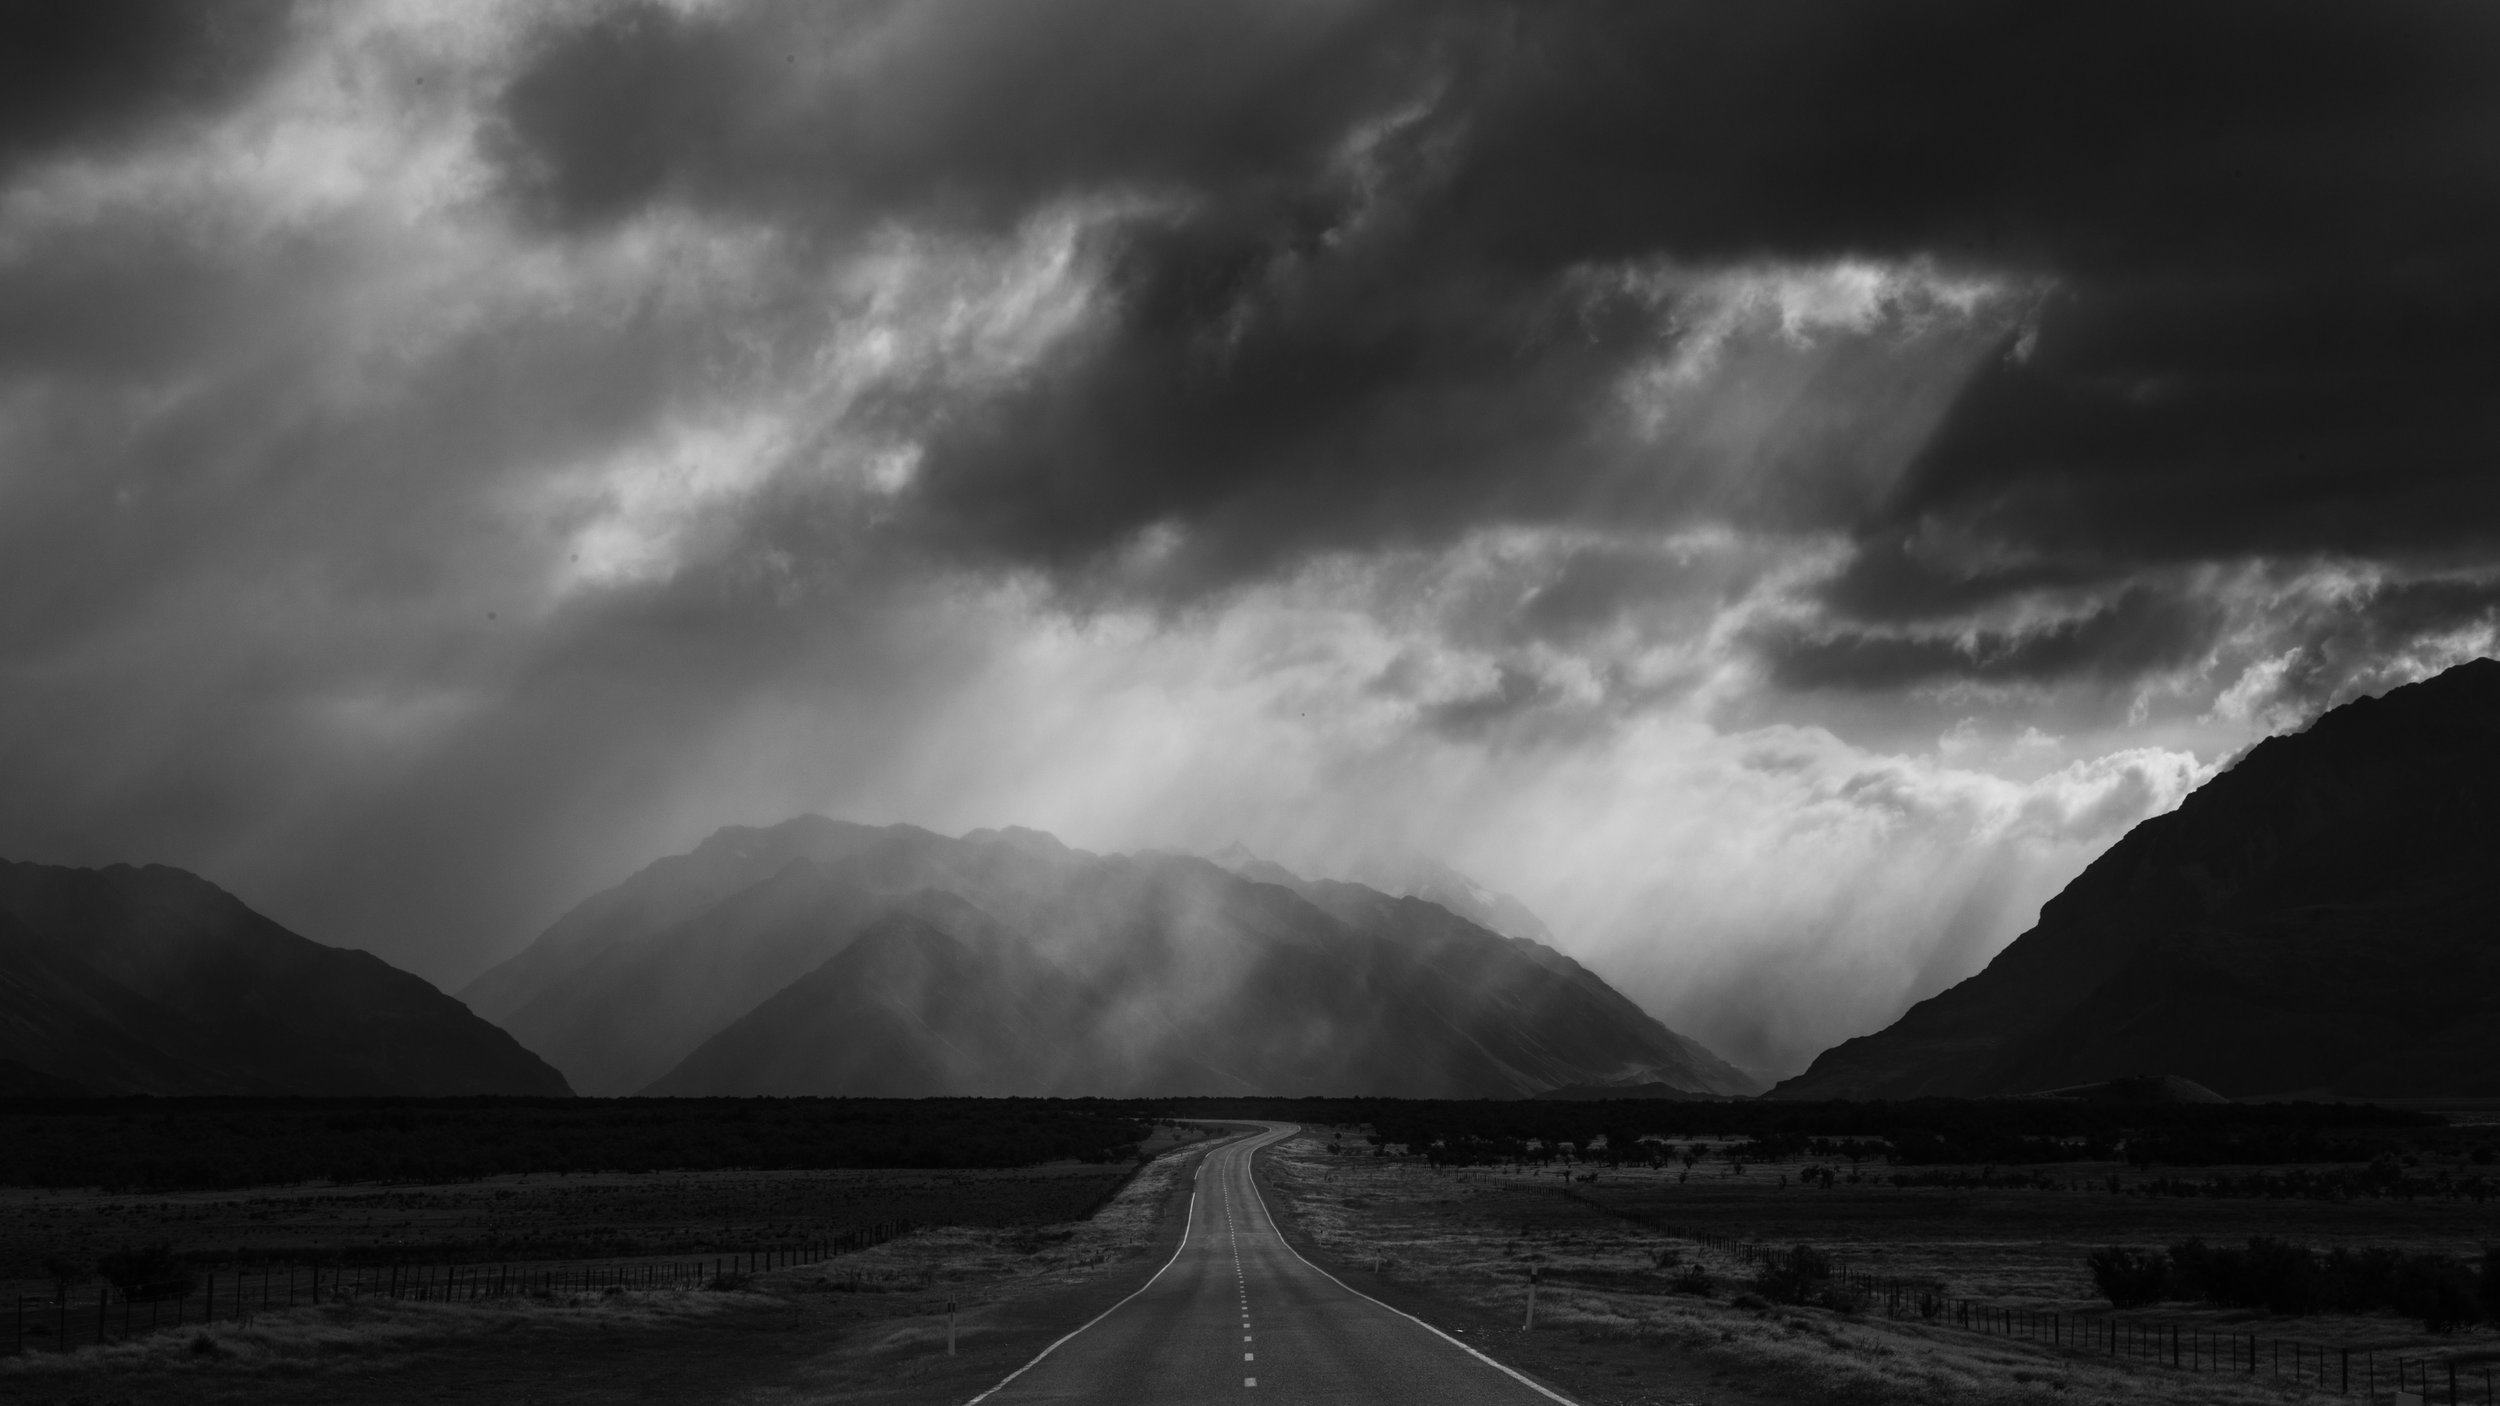 Highway Storm, Geoff Cloake, Eric Young Memorial Trophy and PSNZ Gold Medal for Best Landscape Projected Image.